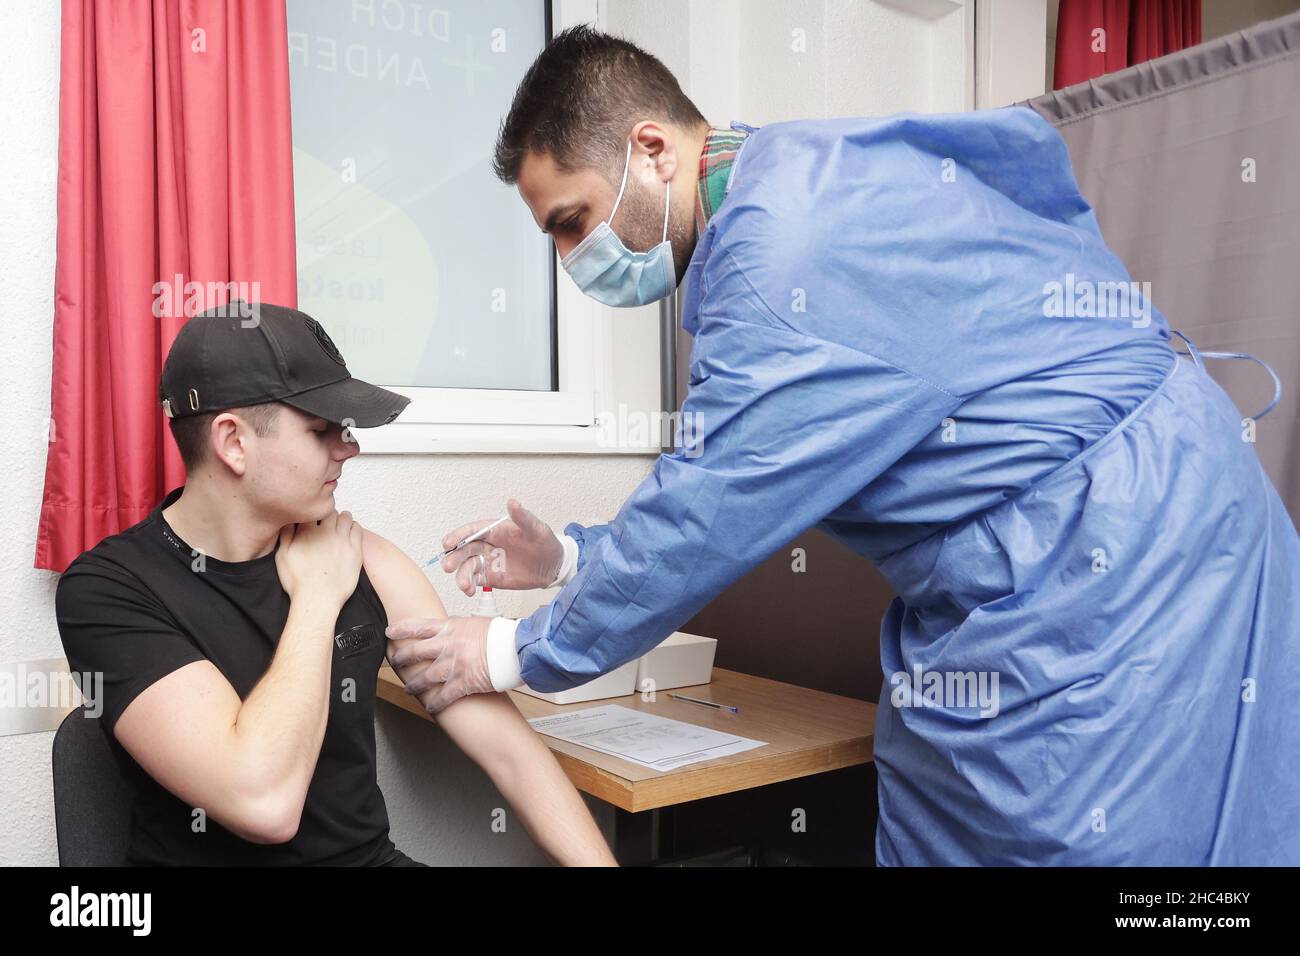 Duisburg, Germany. 24th Dec, 2021. Luke van B. (23, l) is vaccinated  against Corona with the Biontech vaccine by doctor Ahmad-Mujtaba Mostakiem  during a Christmas vaccination marathon in a hotel. Ahmad-Mujtaba Mostakiem